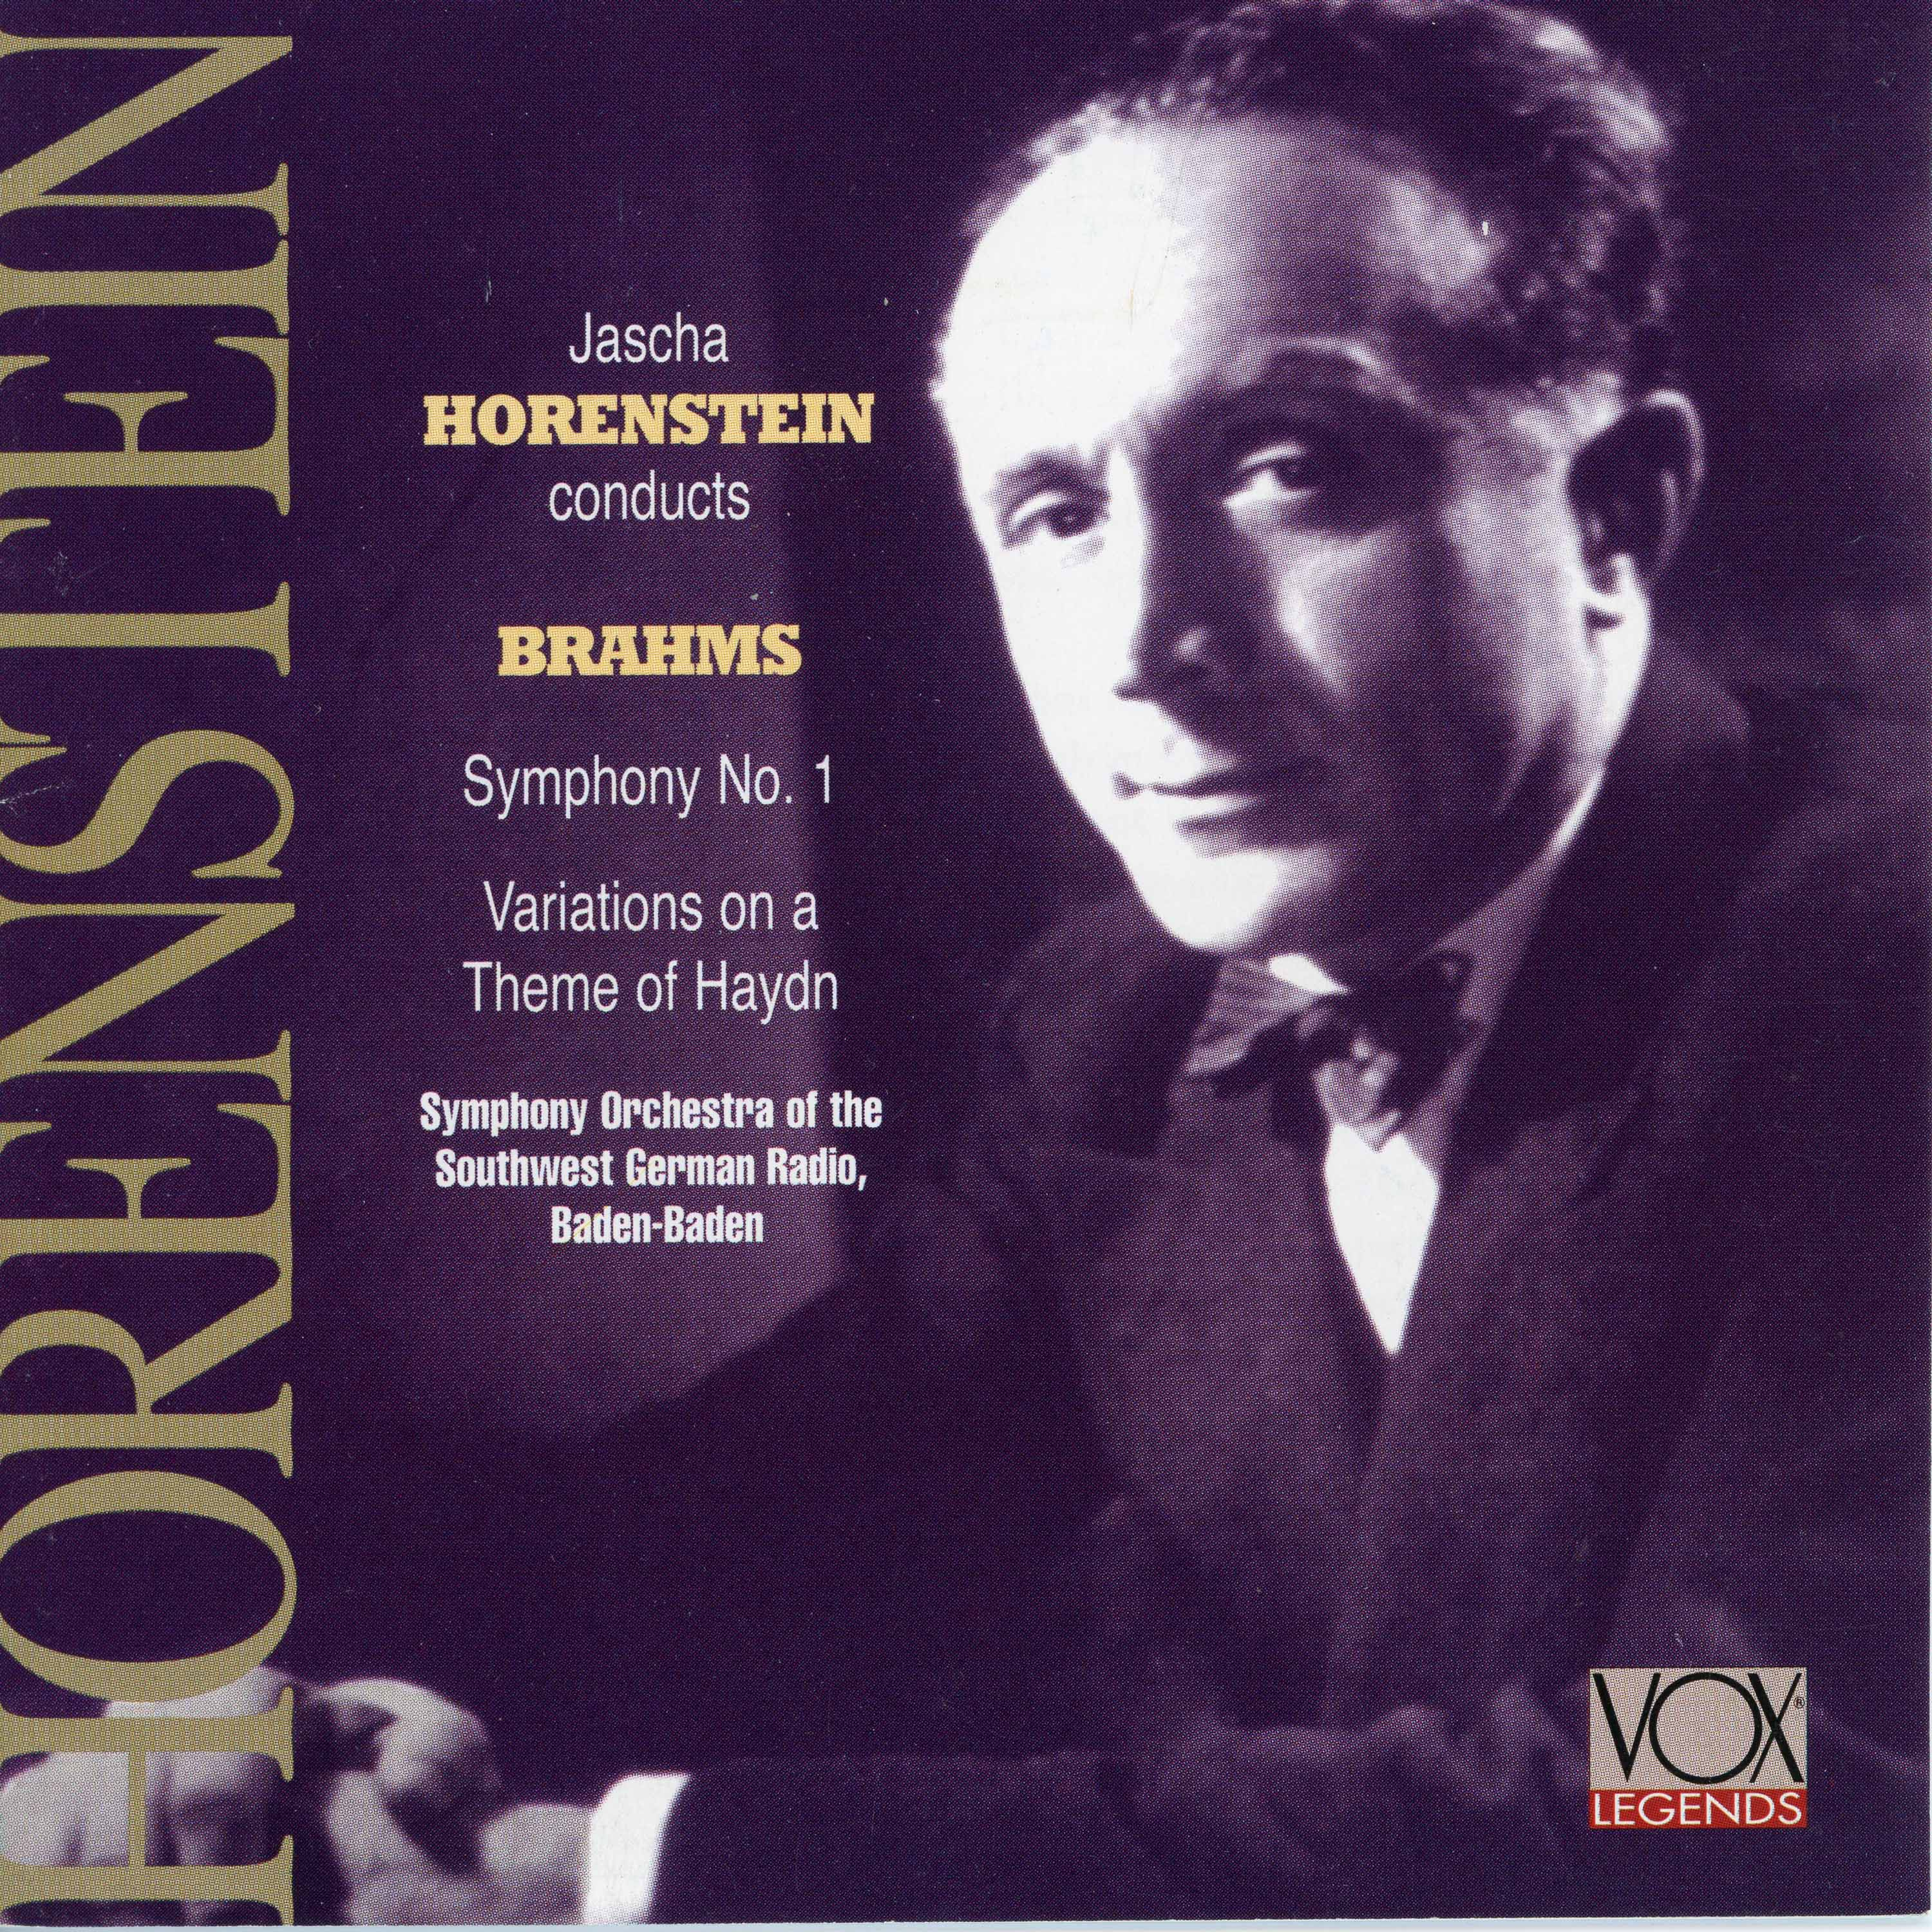 Variations on a Theme by Haydn, Op. 56a "St. Anthony Variations":Variations on a Theme by Haydn, Op. 56a "St. Anthony Variations": Var. 2, Più vivace